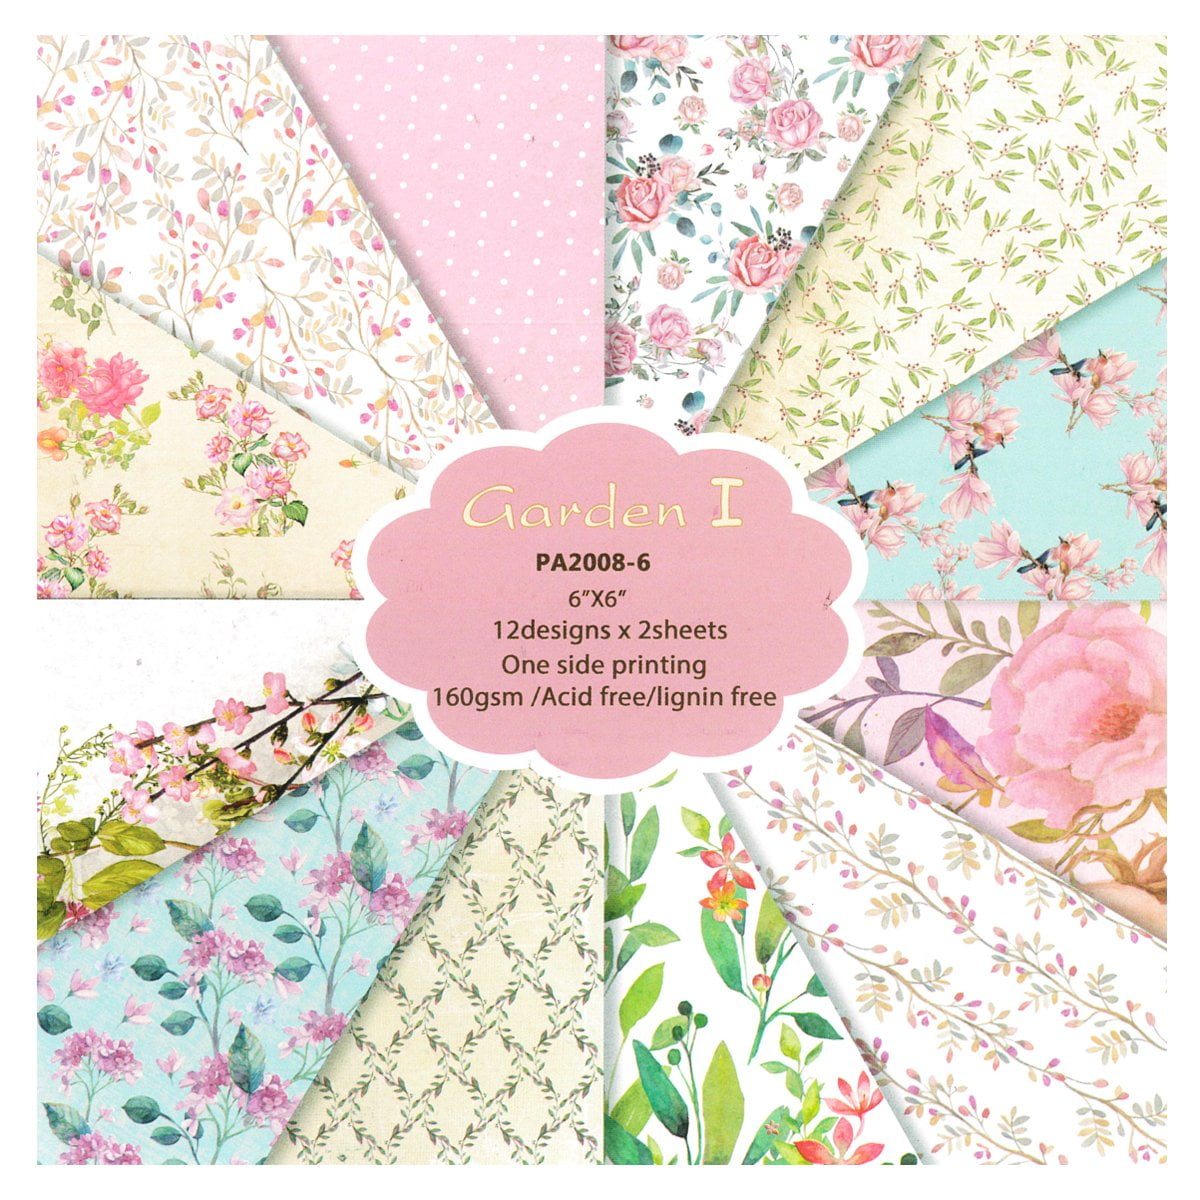 Wrapables 6x6 Decorative Single-Sided Scrapbook Paper for Arts & Crafts  Projects, Scrapbooking, Card-Making, Pink Floral Theme 